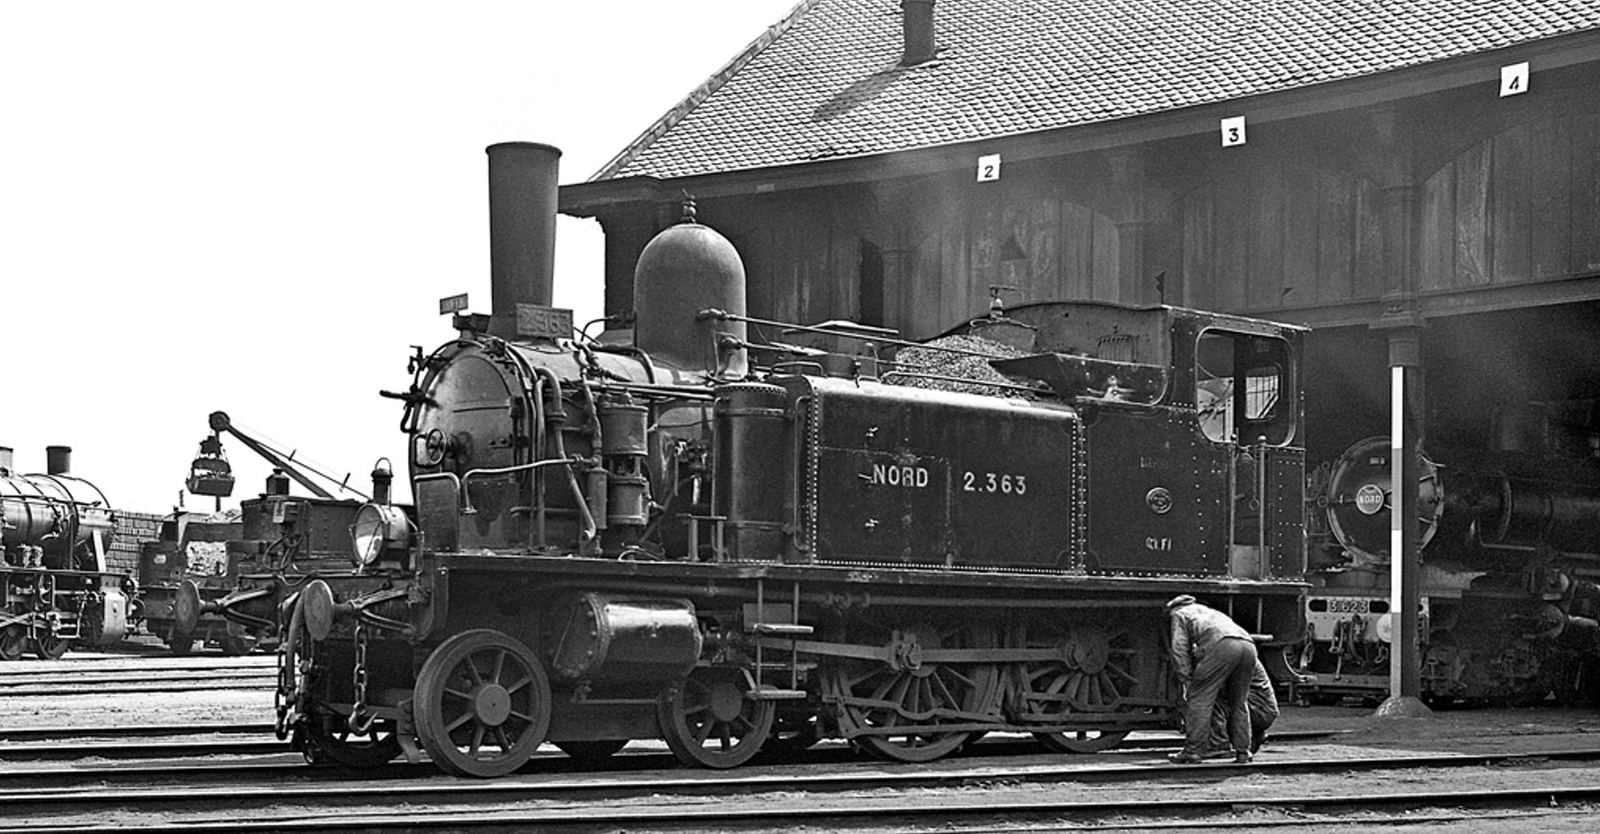 2.363 in July 1936 in Boulogne depot